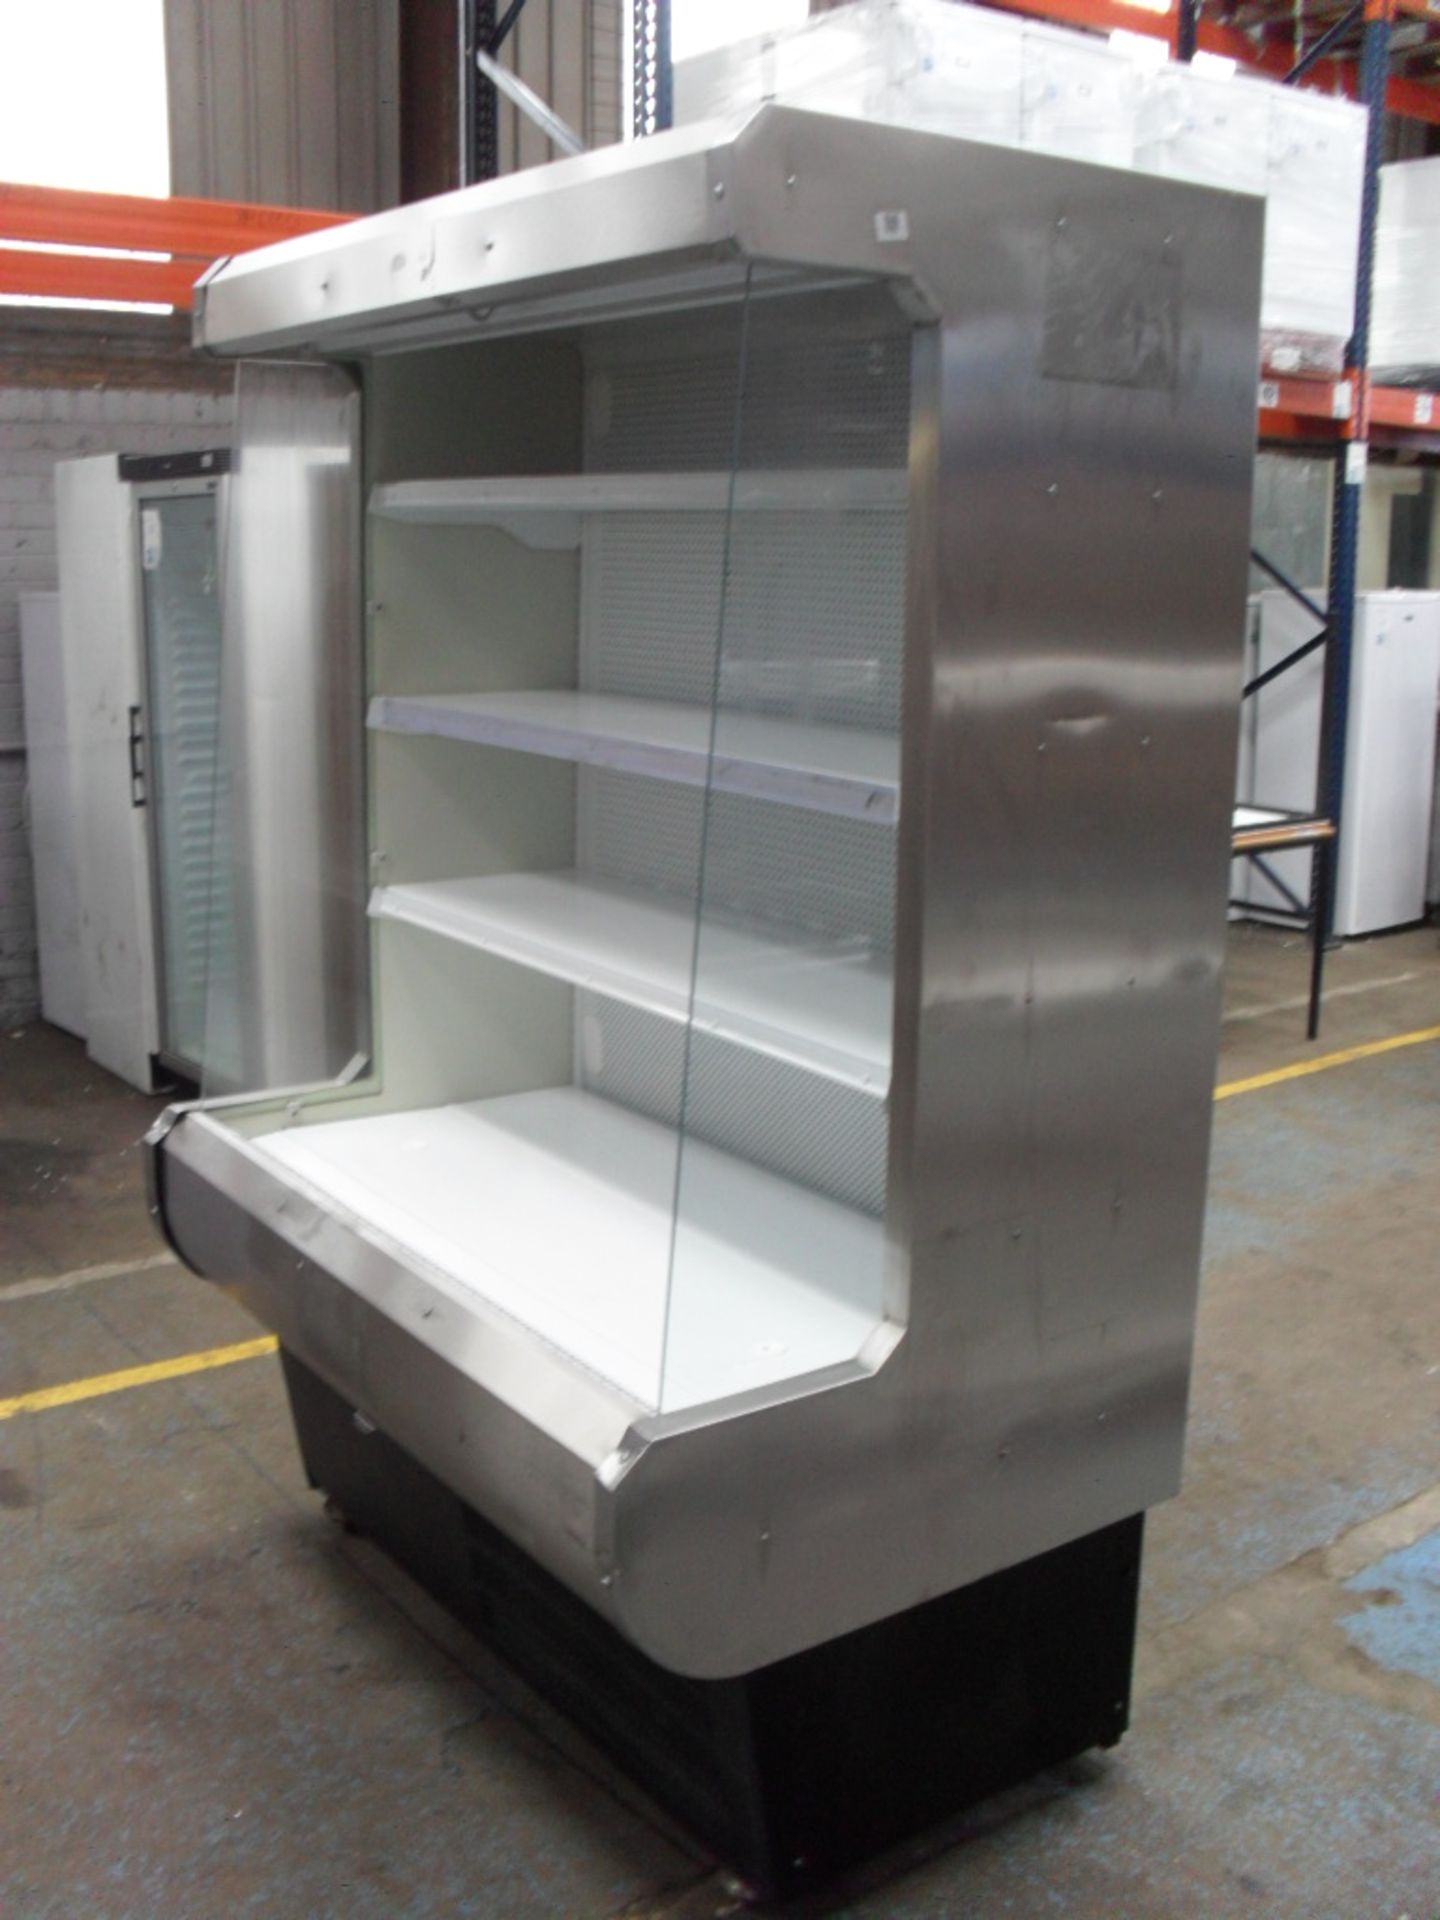 KOXKA M-14 {016964} 6FT MULTI DECK DISPLAY FRIDGE 240v 13amp connection and is fitted with lighting - Image 2 of 5